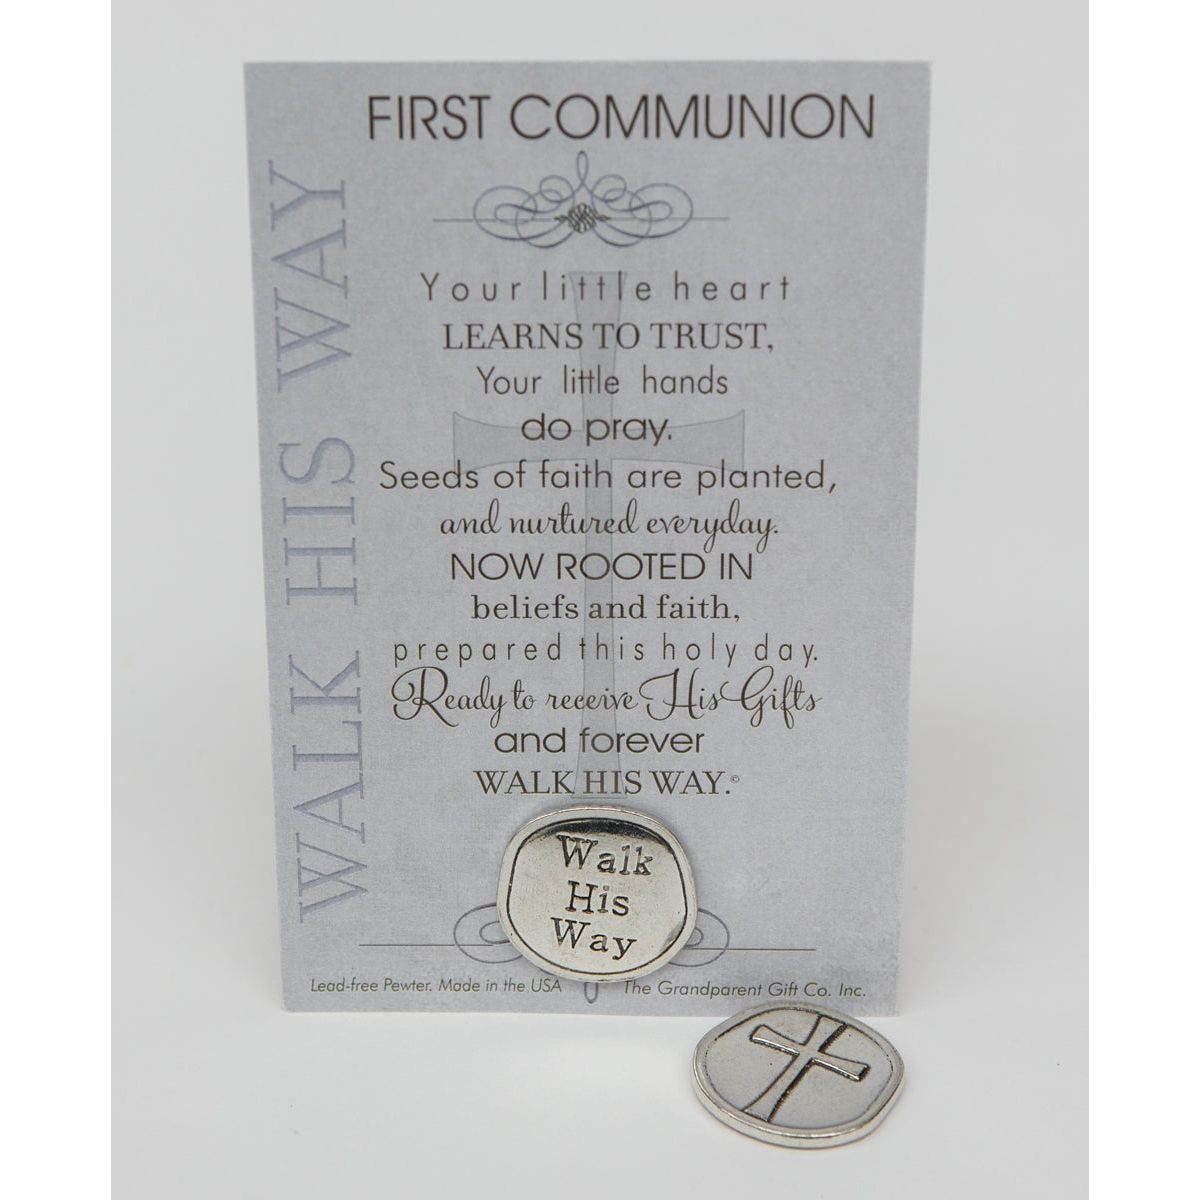 First Communion Gift: Handmade pewter coin with "Walk His Way" on one side and an cross on the other, packaged in a clear bag with "First Communion" poem.